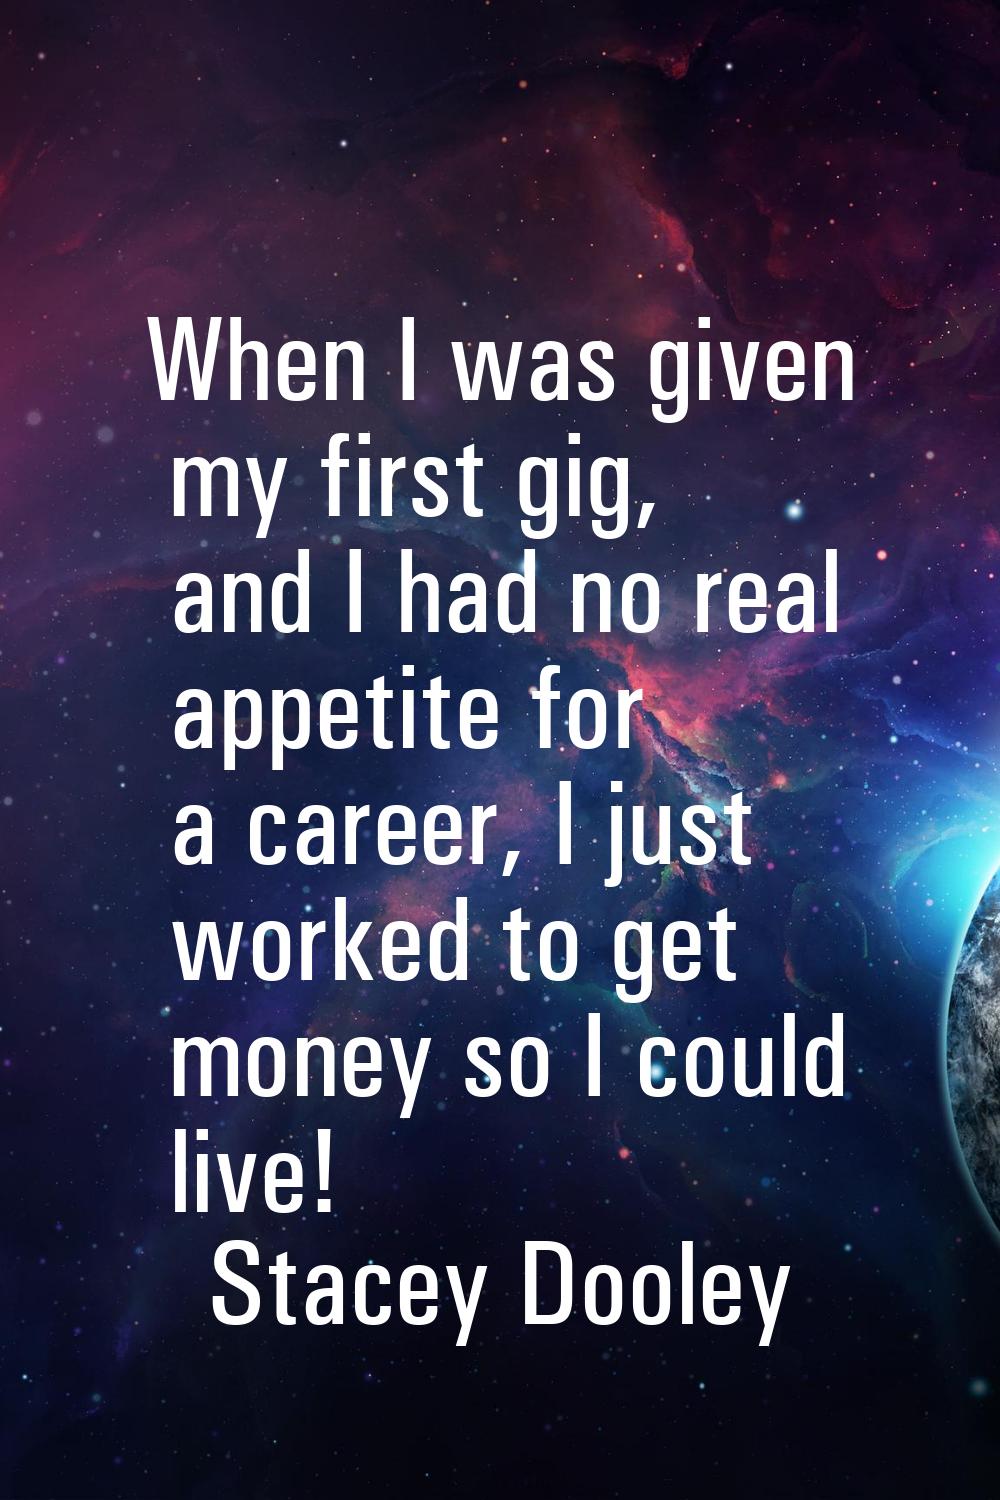 When I was given my first gig, and I had no real appetite for a career, I just worked to get money 